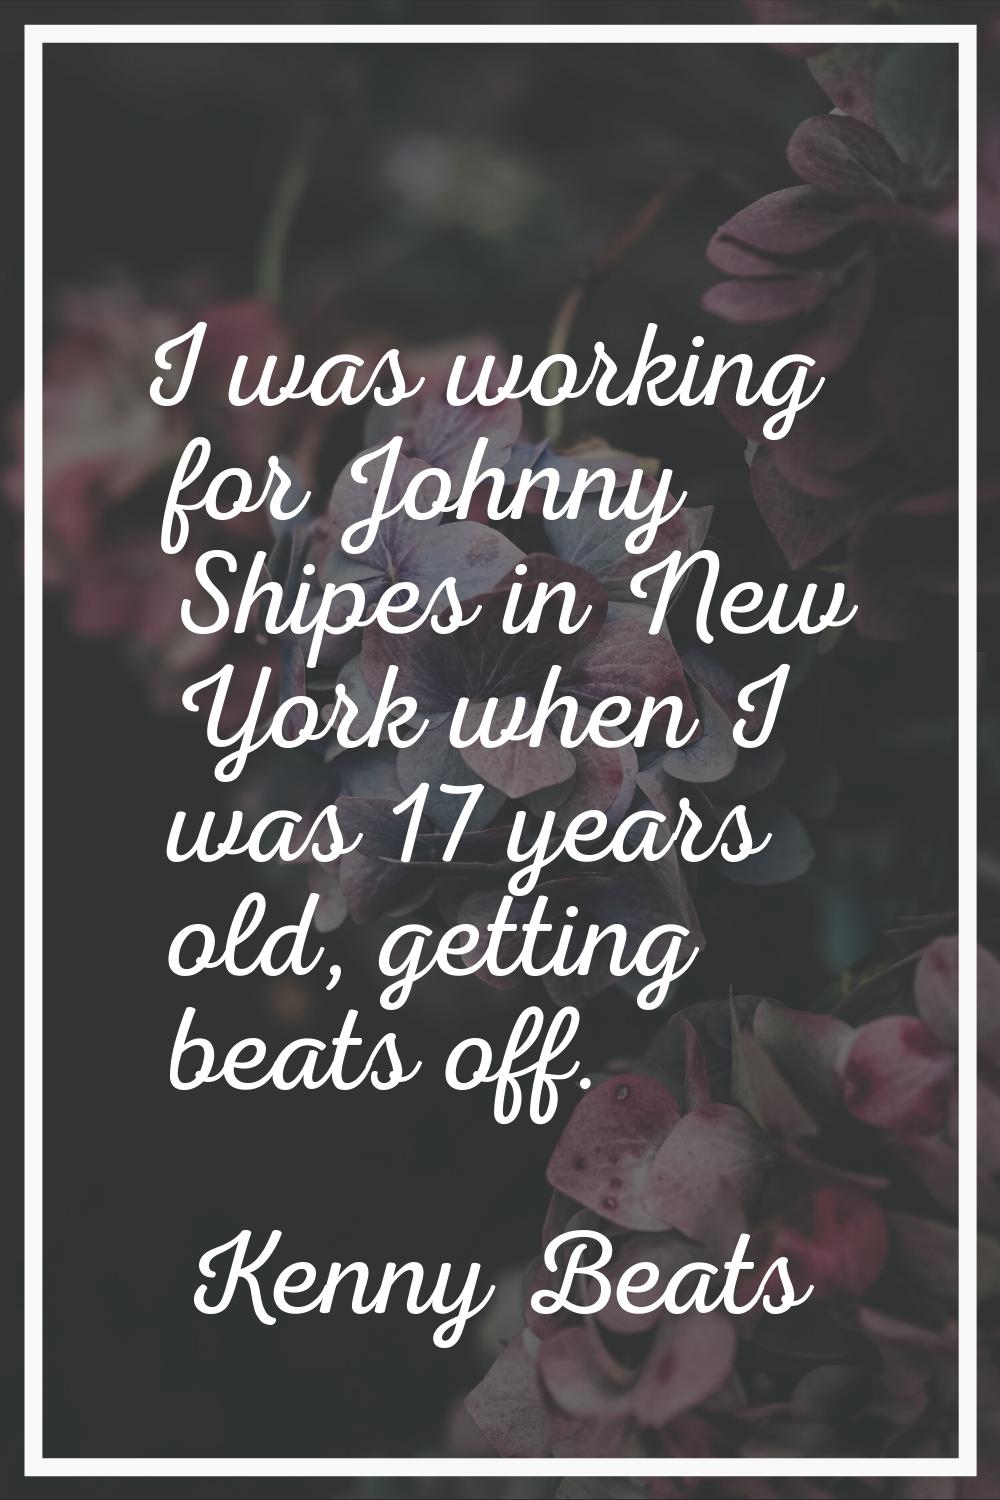 I was working for Johnny Shipes in New York when I was 17 years old, getting beats off.